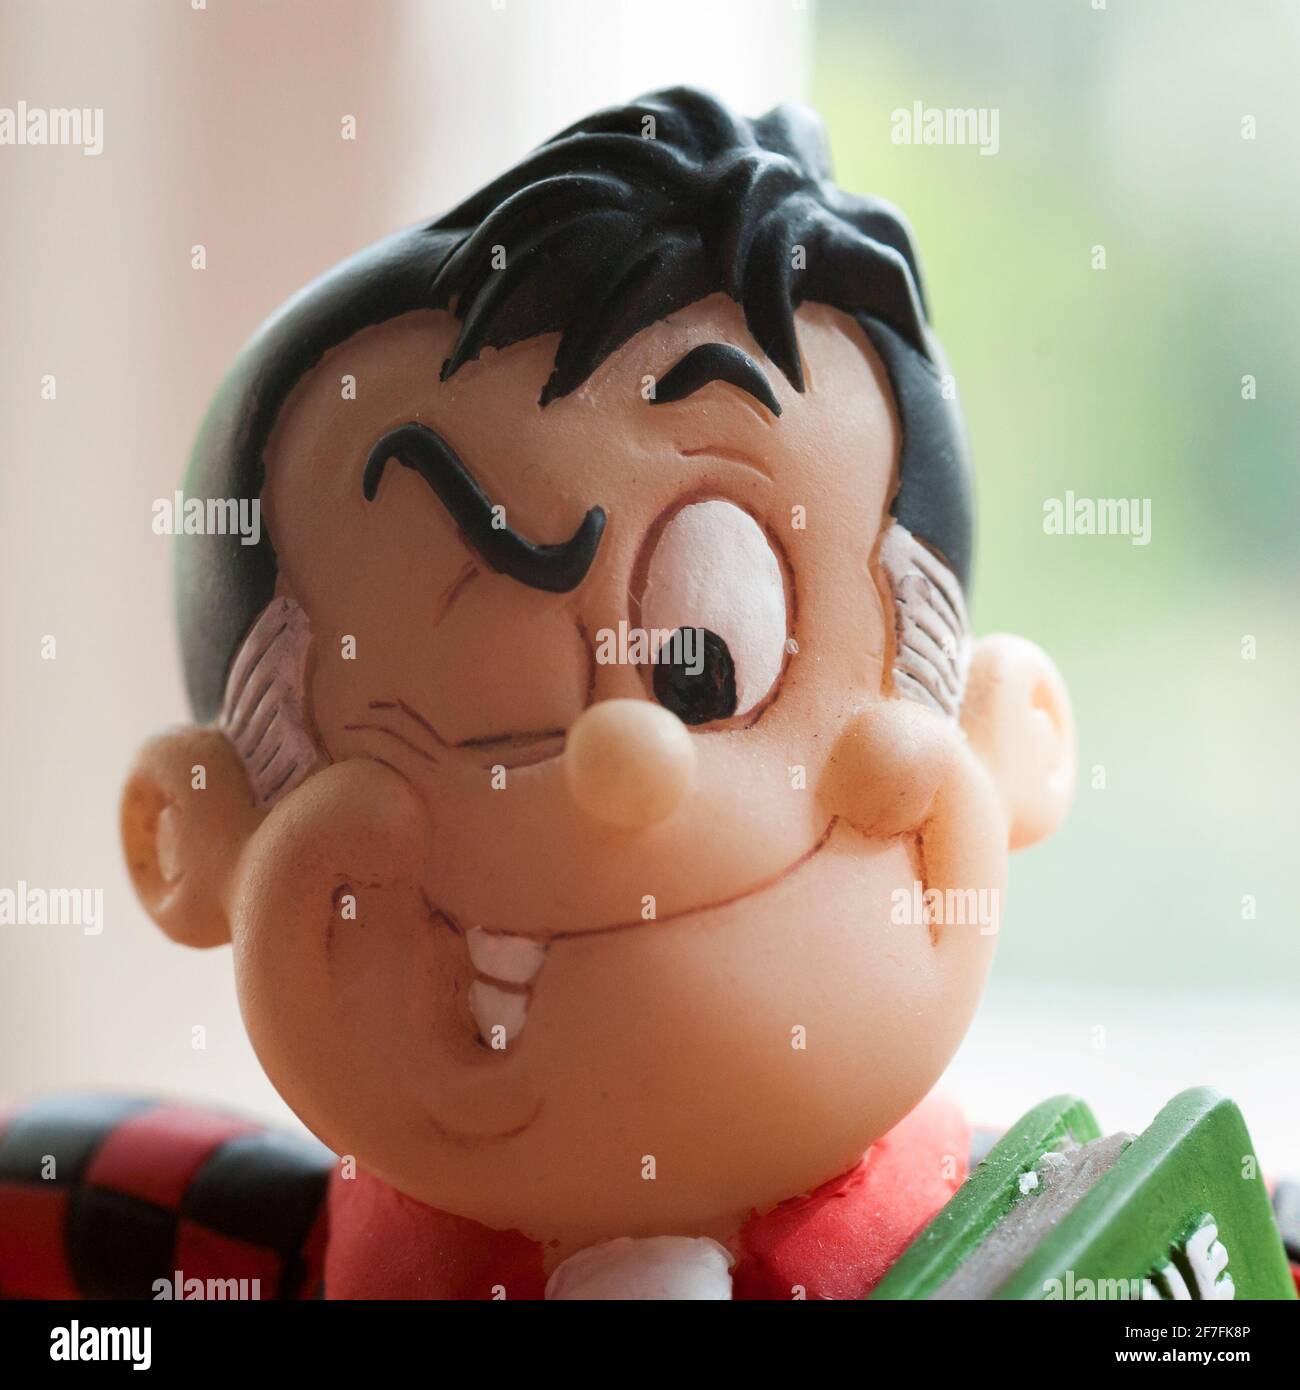 A close up of the head of a small figurine of Roger the Dodger, a character from the DC Thomson comic, The Beano. Stock Photo